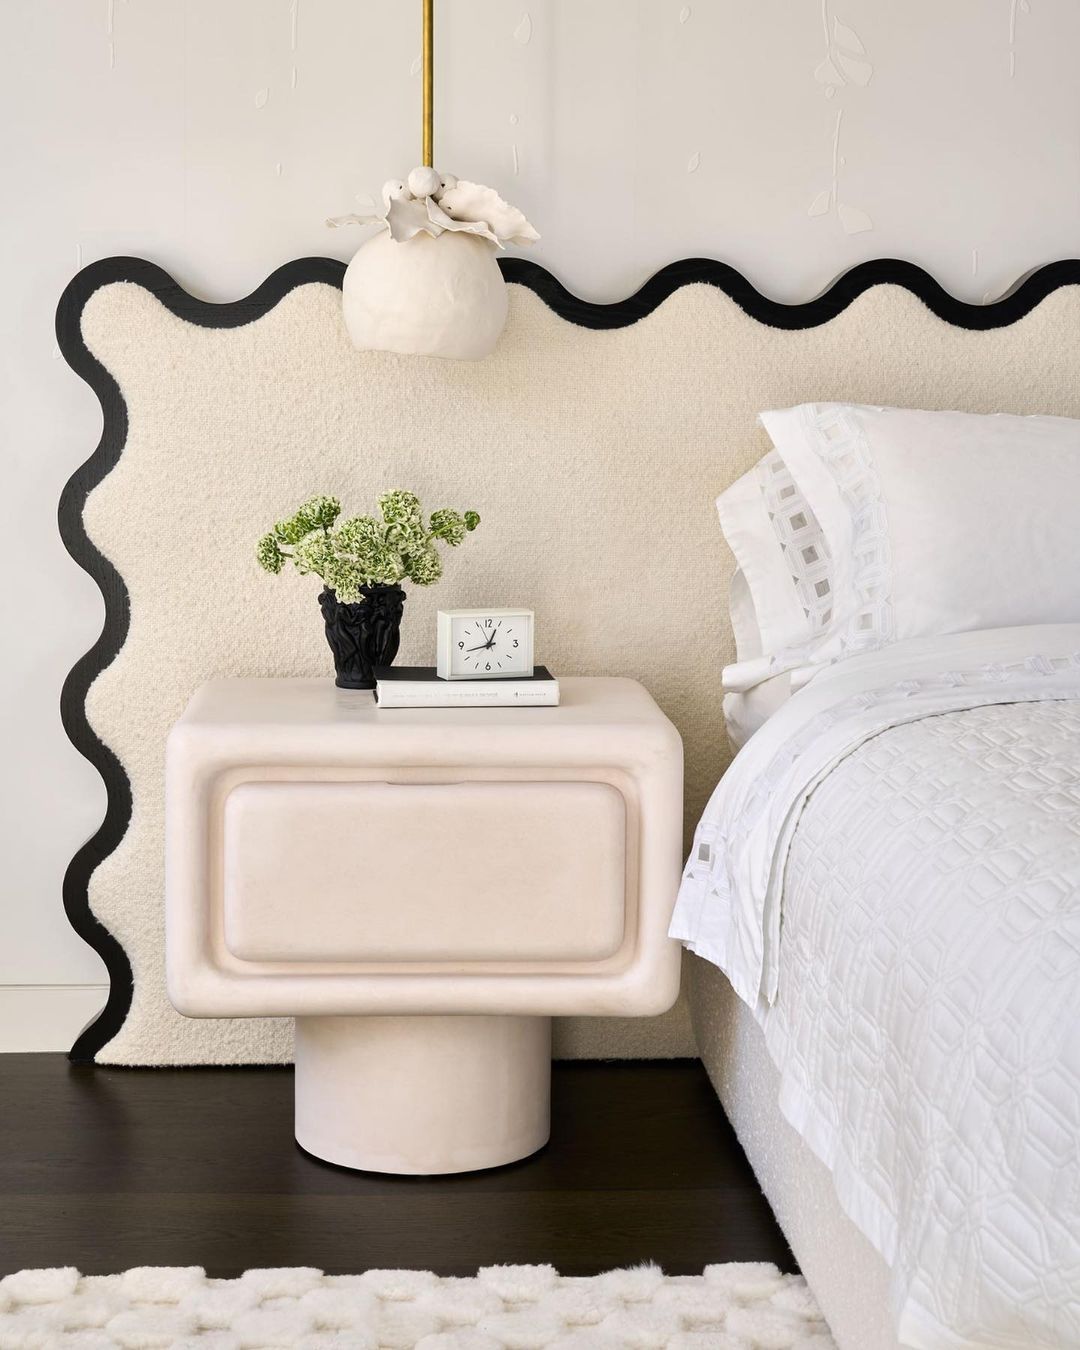 Elevate Your Bedroom with a Modern
Headboard Design